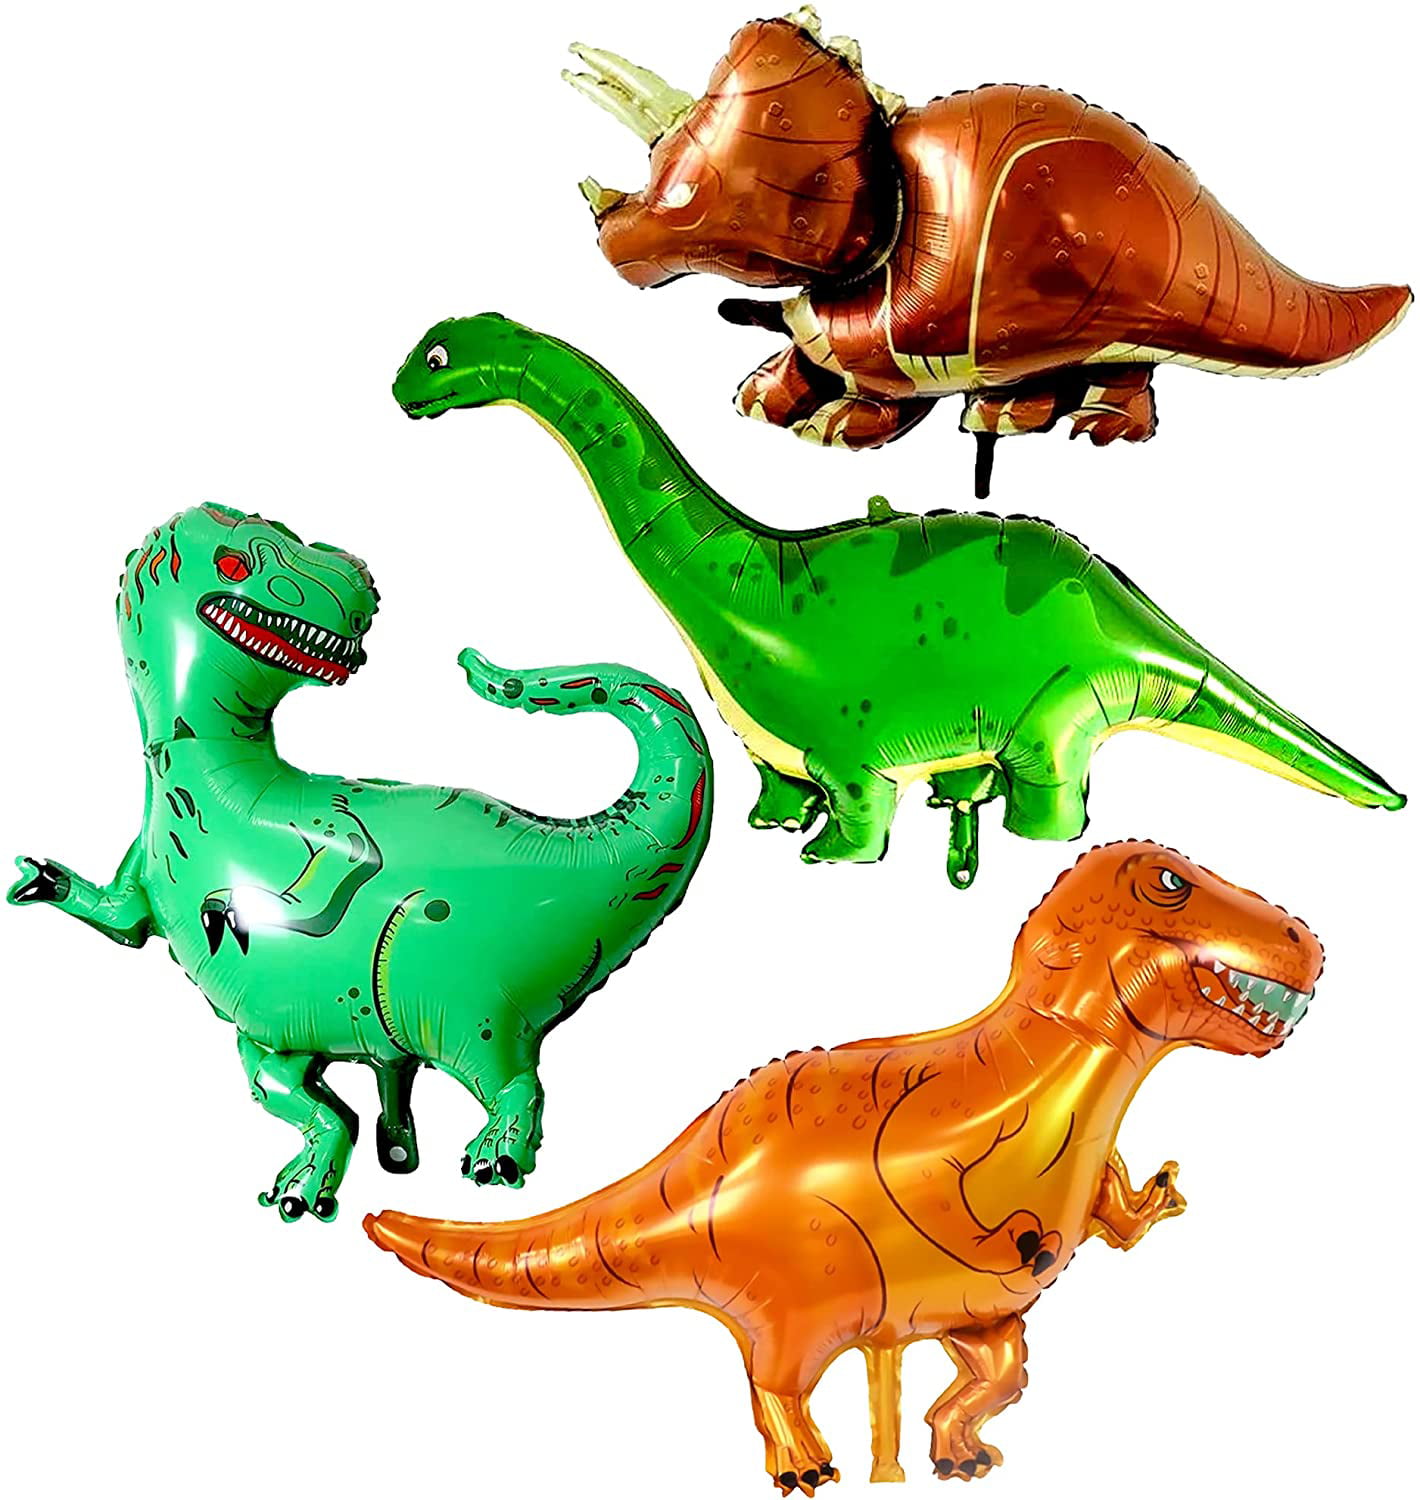 Triceratops T-rex Raptor Allosaurus Dinosaur Balloons 5 Foil Dinosaur Balloons Inflatable Party Supplies and Decorations for Kids foci cozi